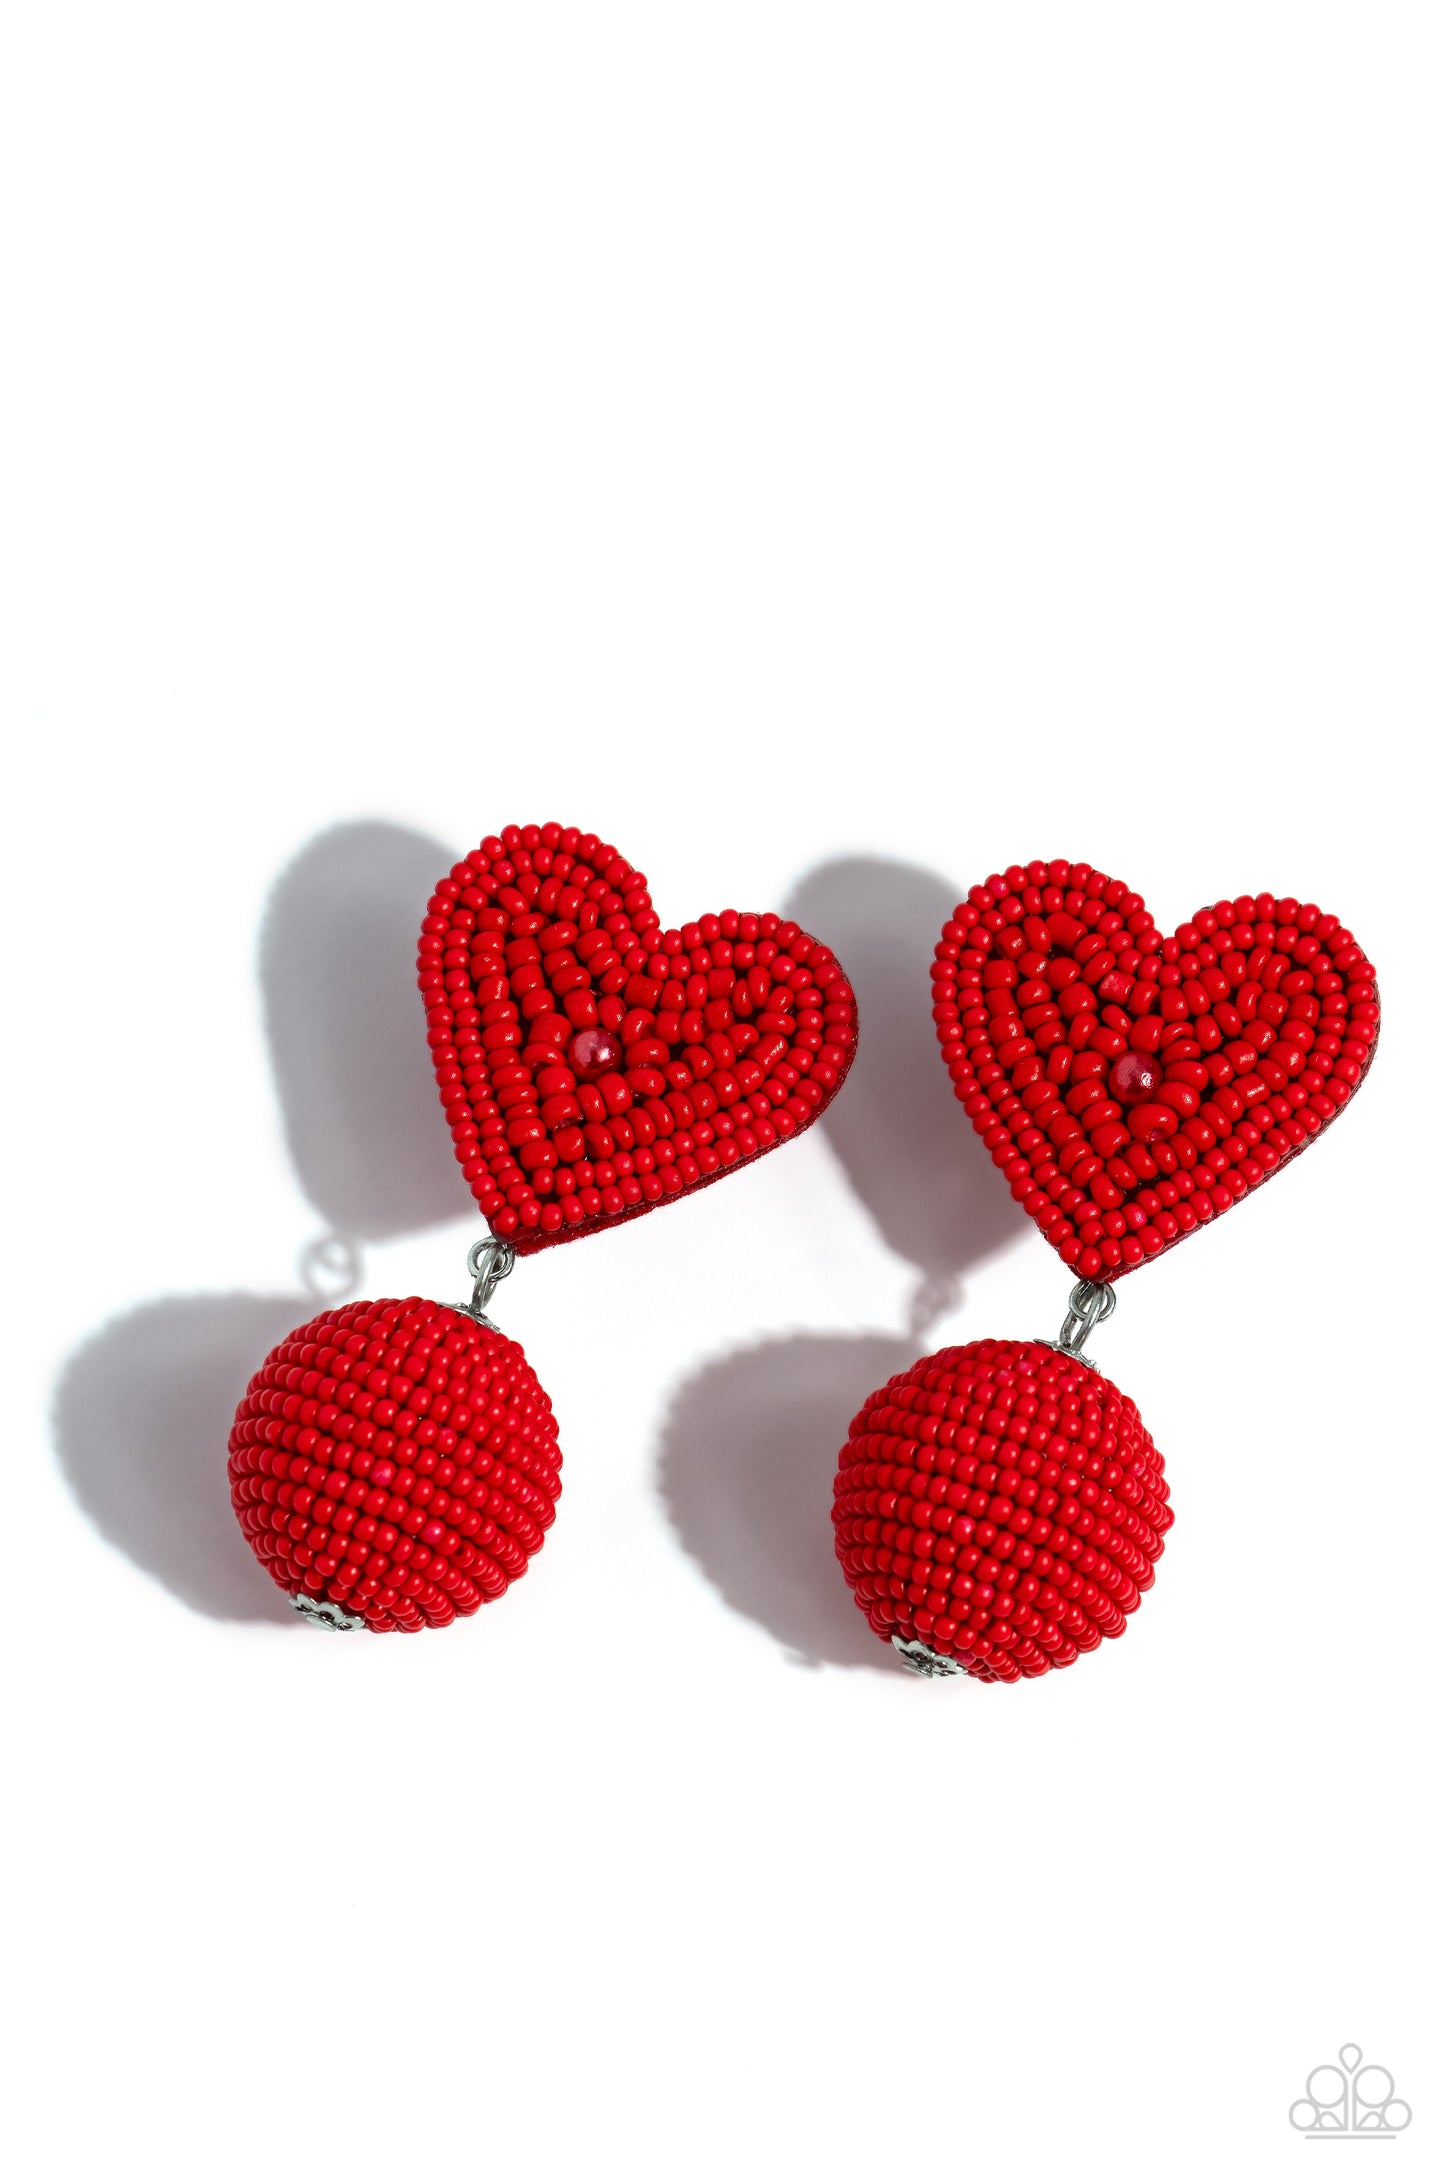 Paparazzi Accessories - Spherical Sweethearts - Red Earrings featuring a red pearl center, a red seed bead heart frame gives way to strands of red seed beads that decoratively spin around a spherical frame, resulting in a colorful three-dimensional display. Earring attaches to a standard post fitting.  Sold as one pair of post earrings.